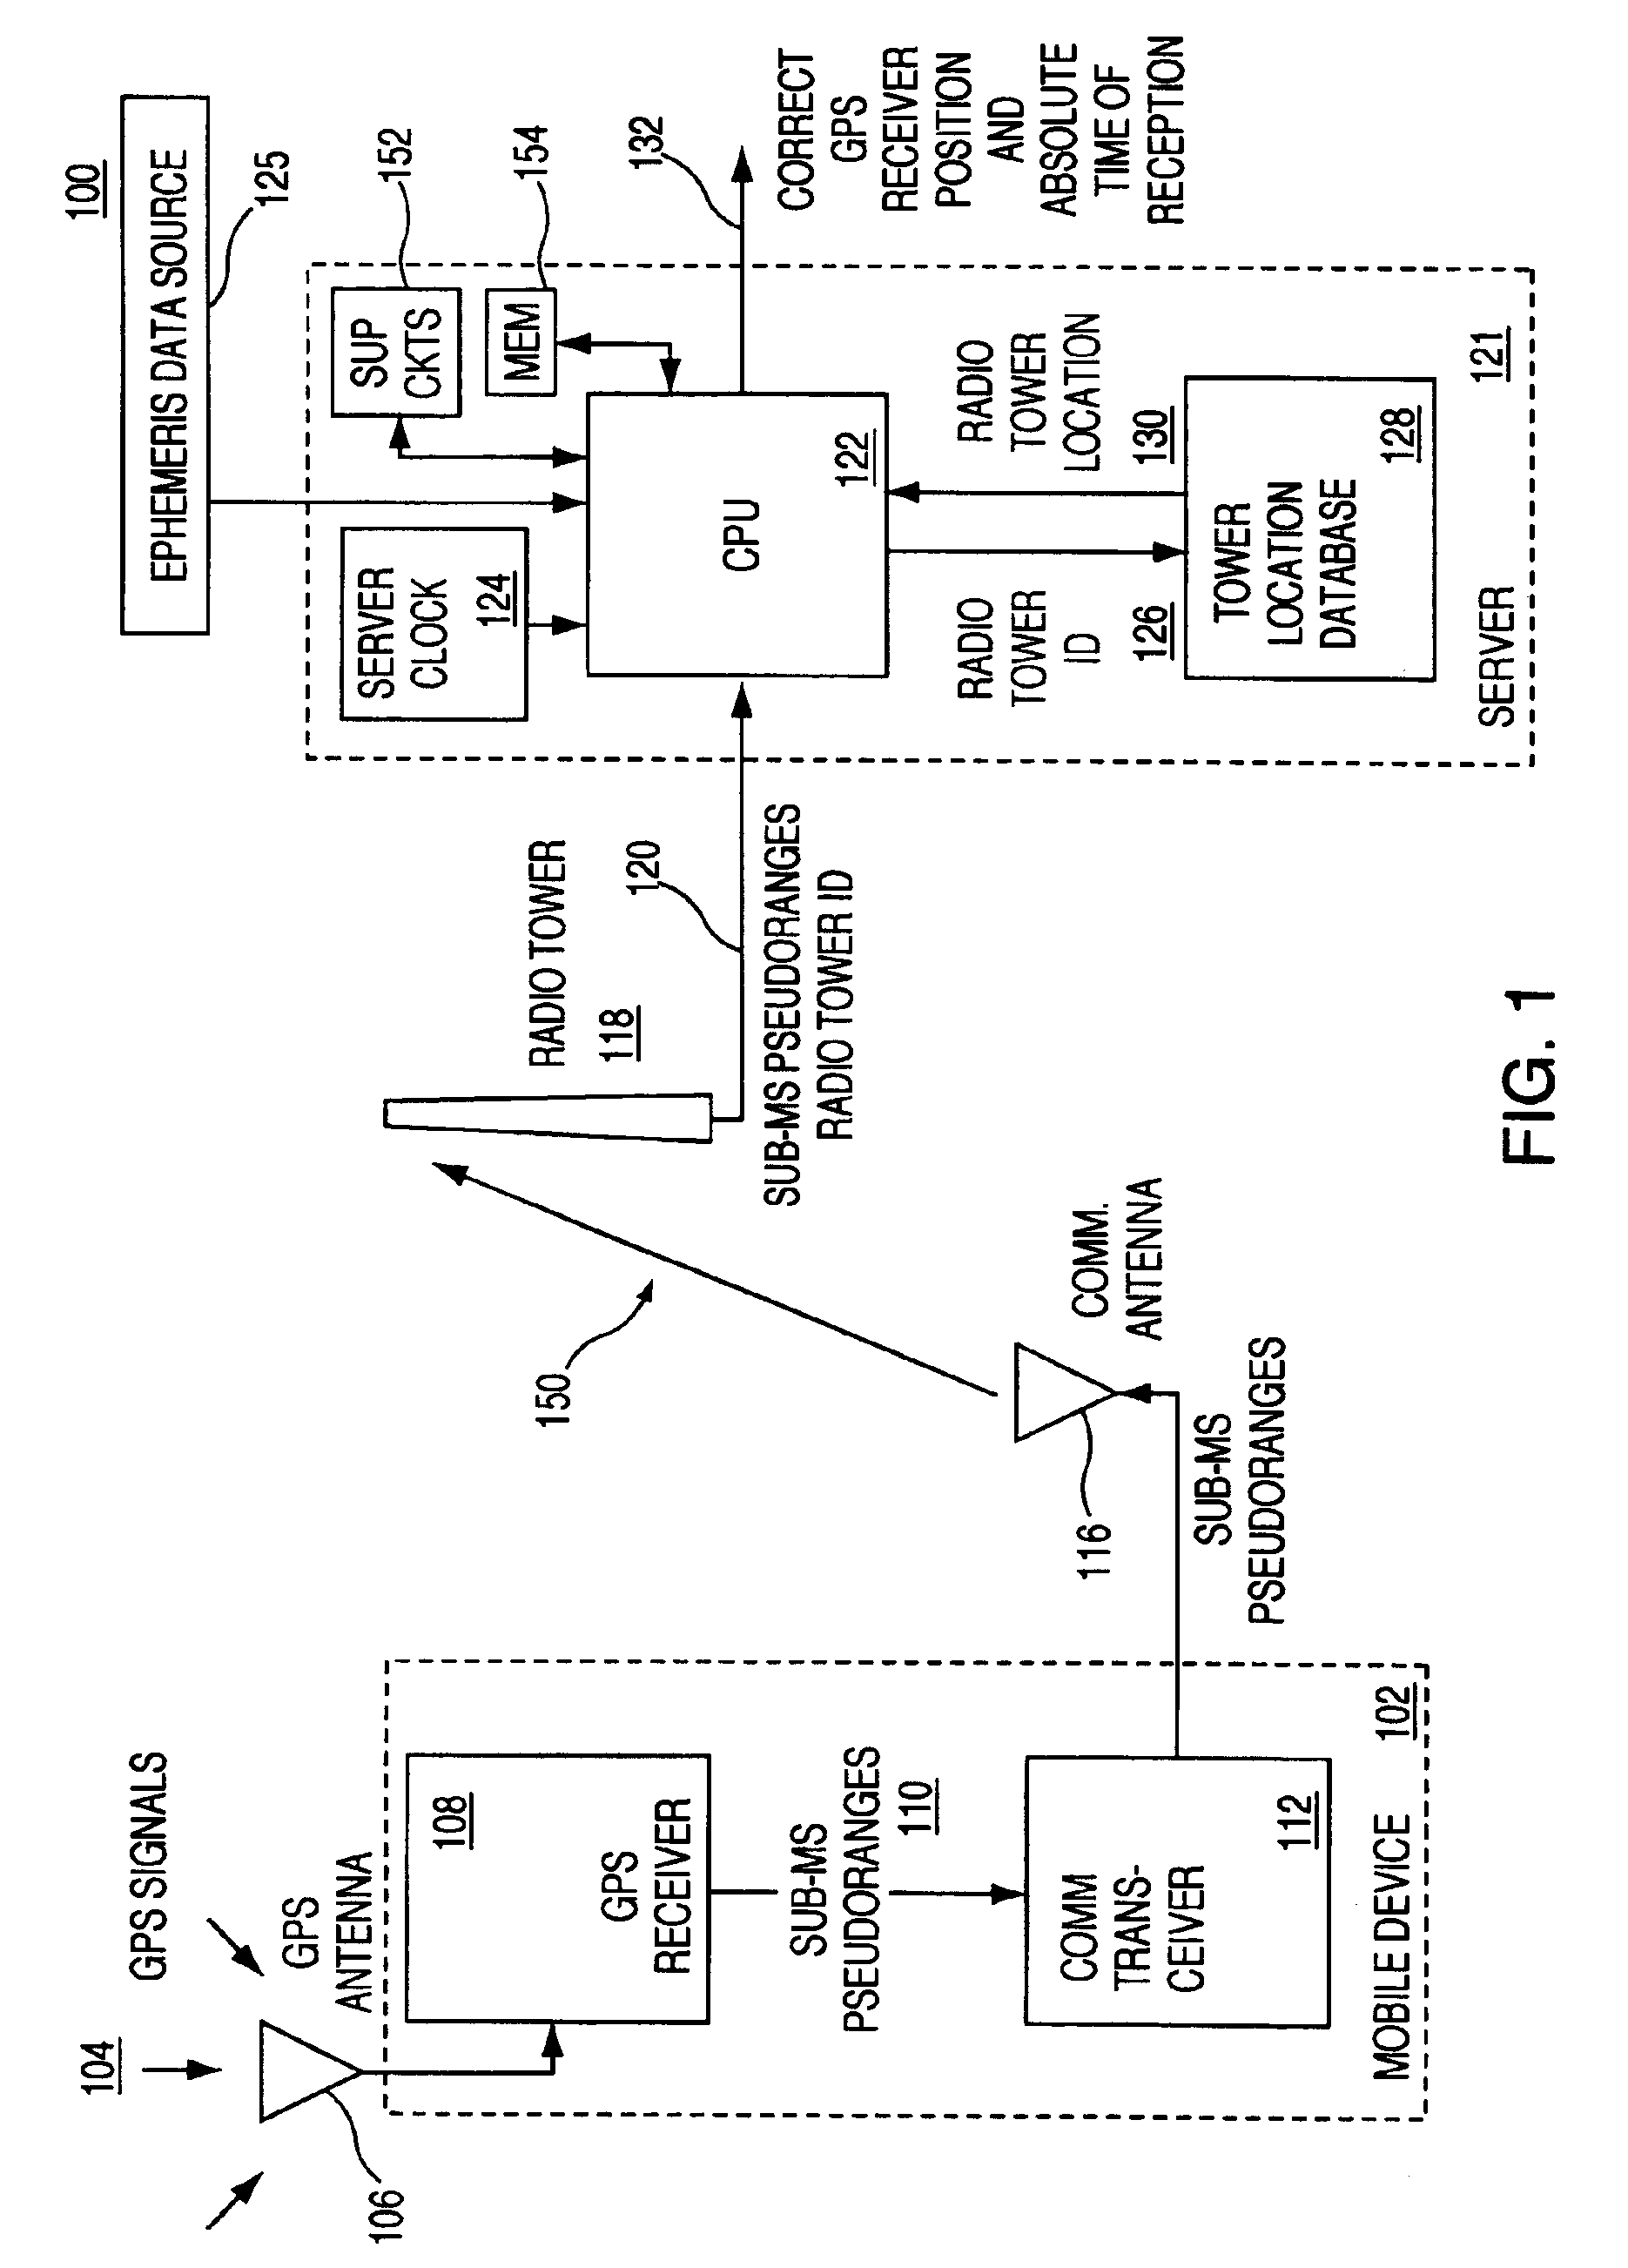 Method and apparatus for forming a dynamic model to locate position of a satellite receiver